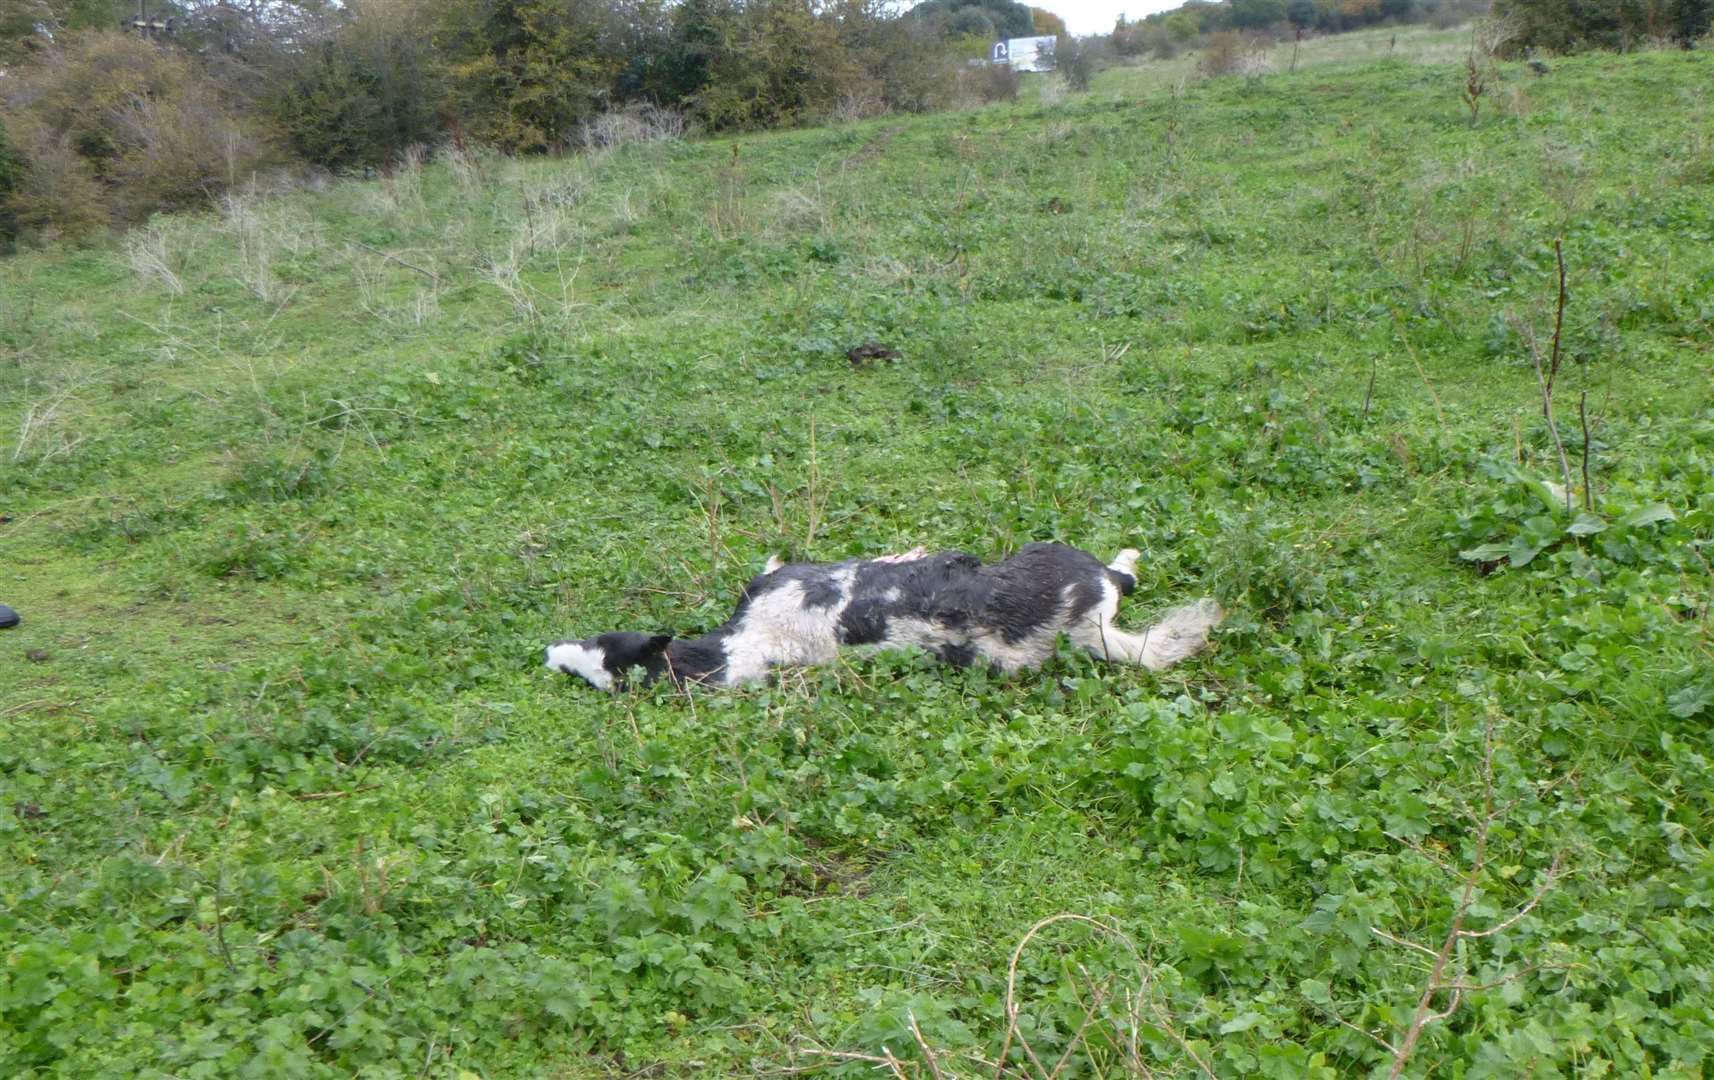 The dead foal was found in a field in Greenhithe. Picture: RSPCA (21922316)